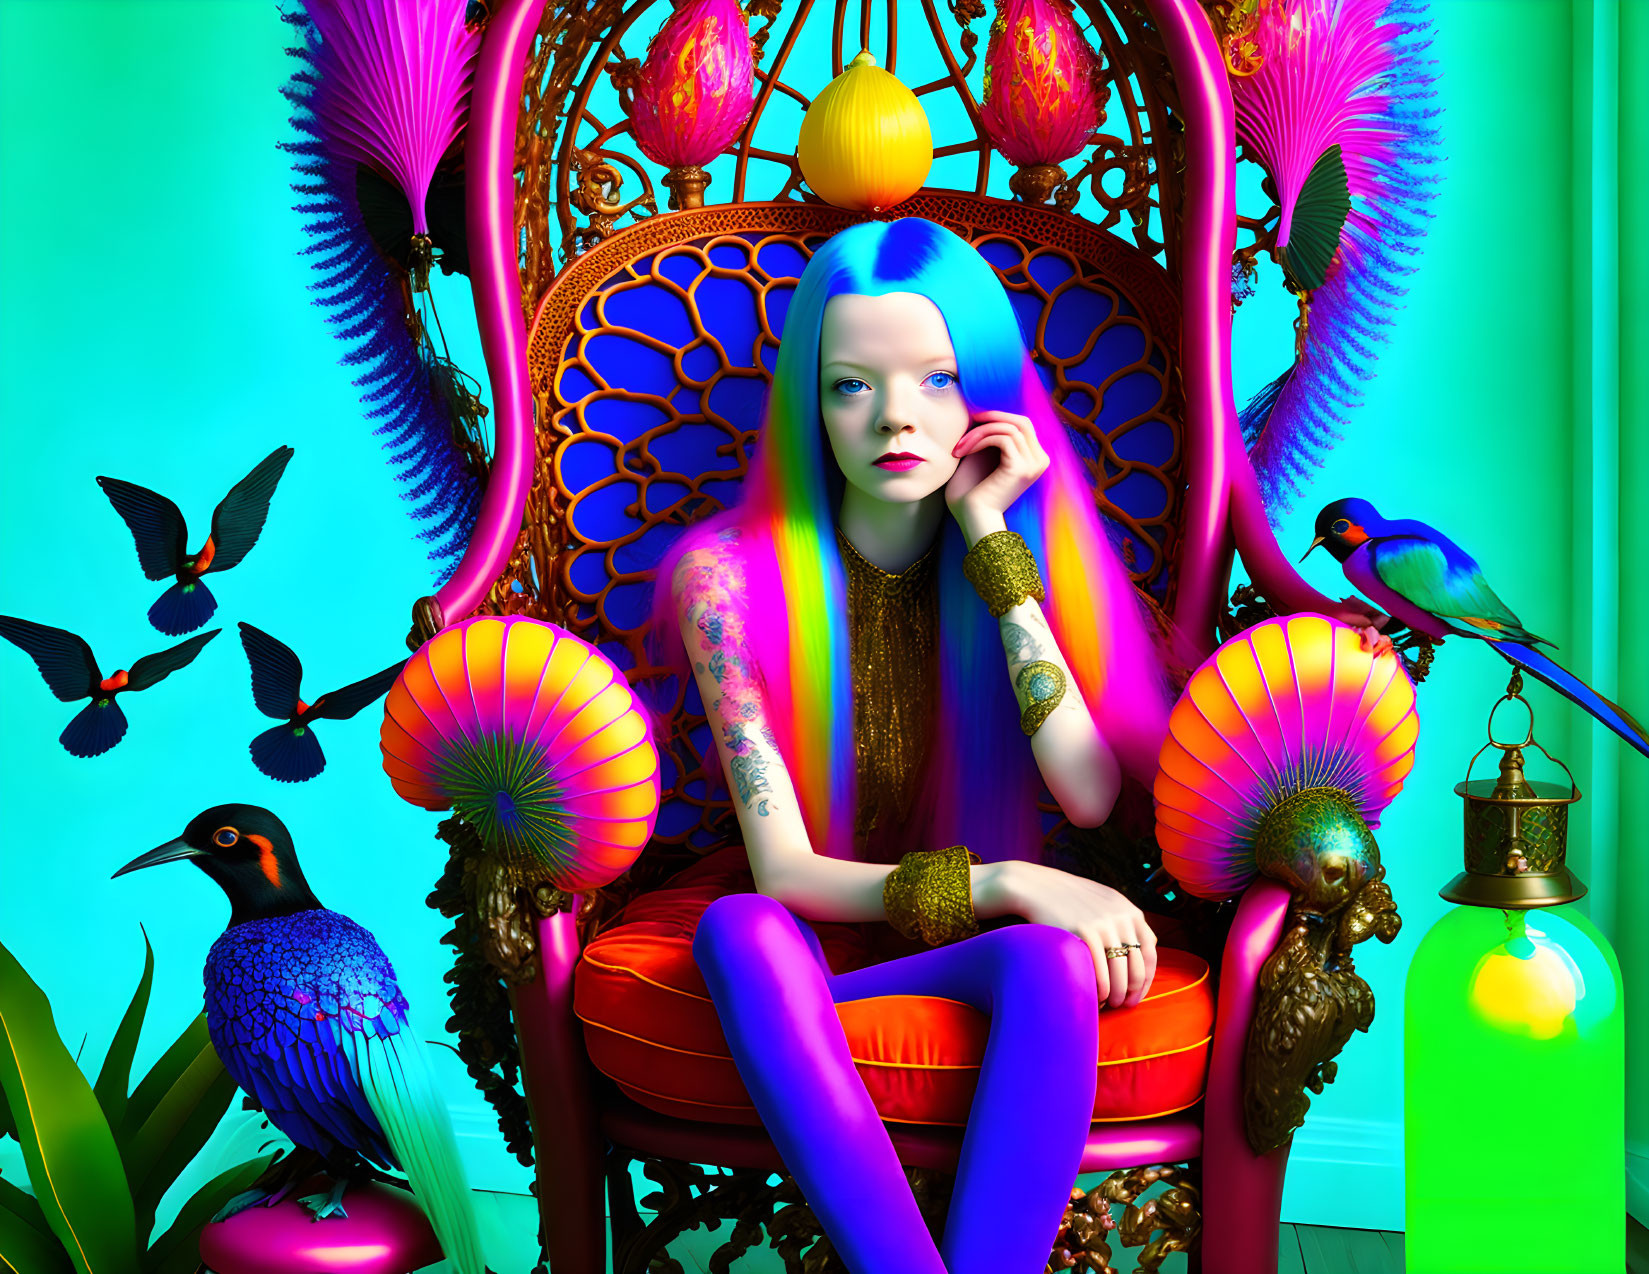 Vibrant image: Person with blue hair on ornate chair with exotic birds.